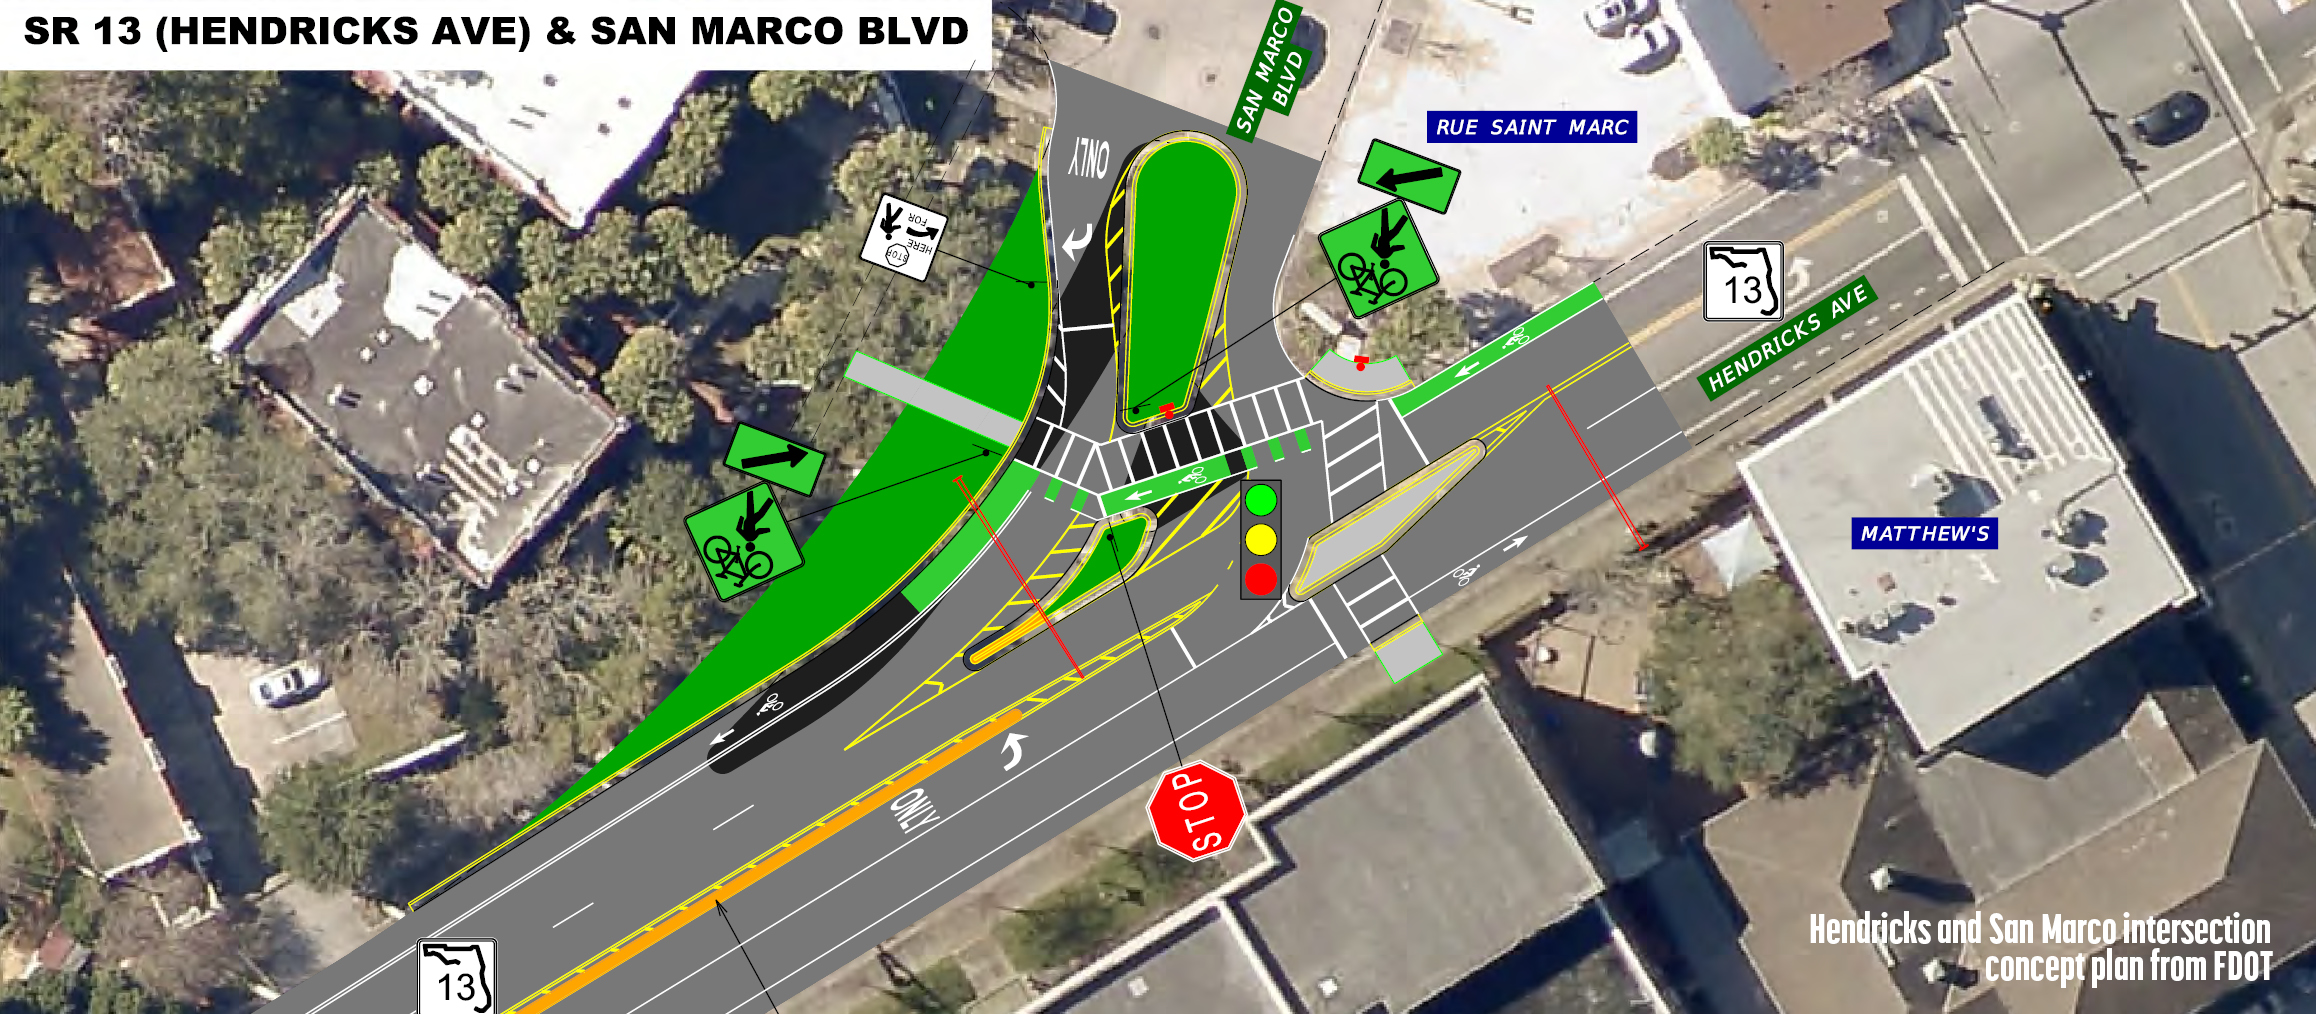 Hendricks and San Marco intersection concept plan from FDOT